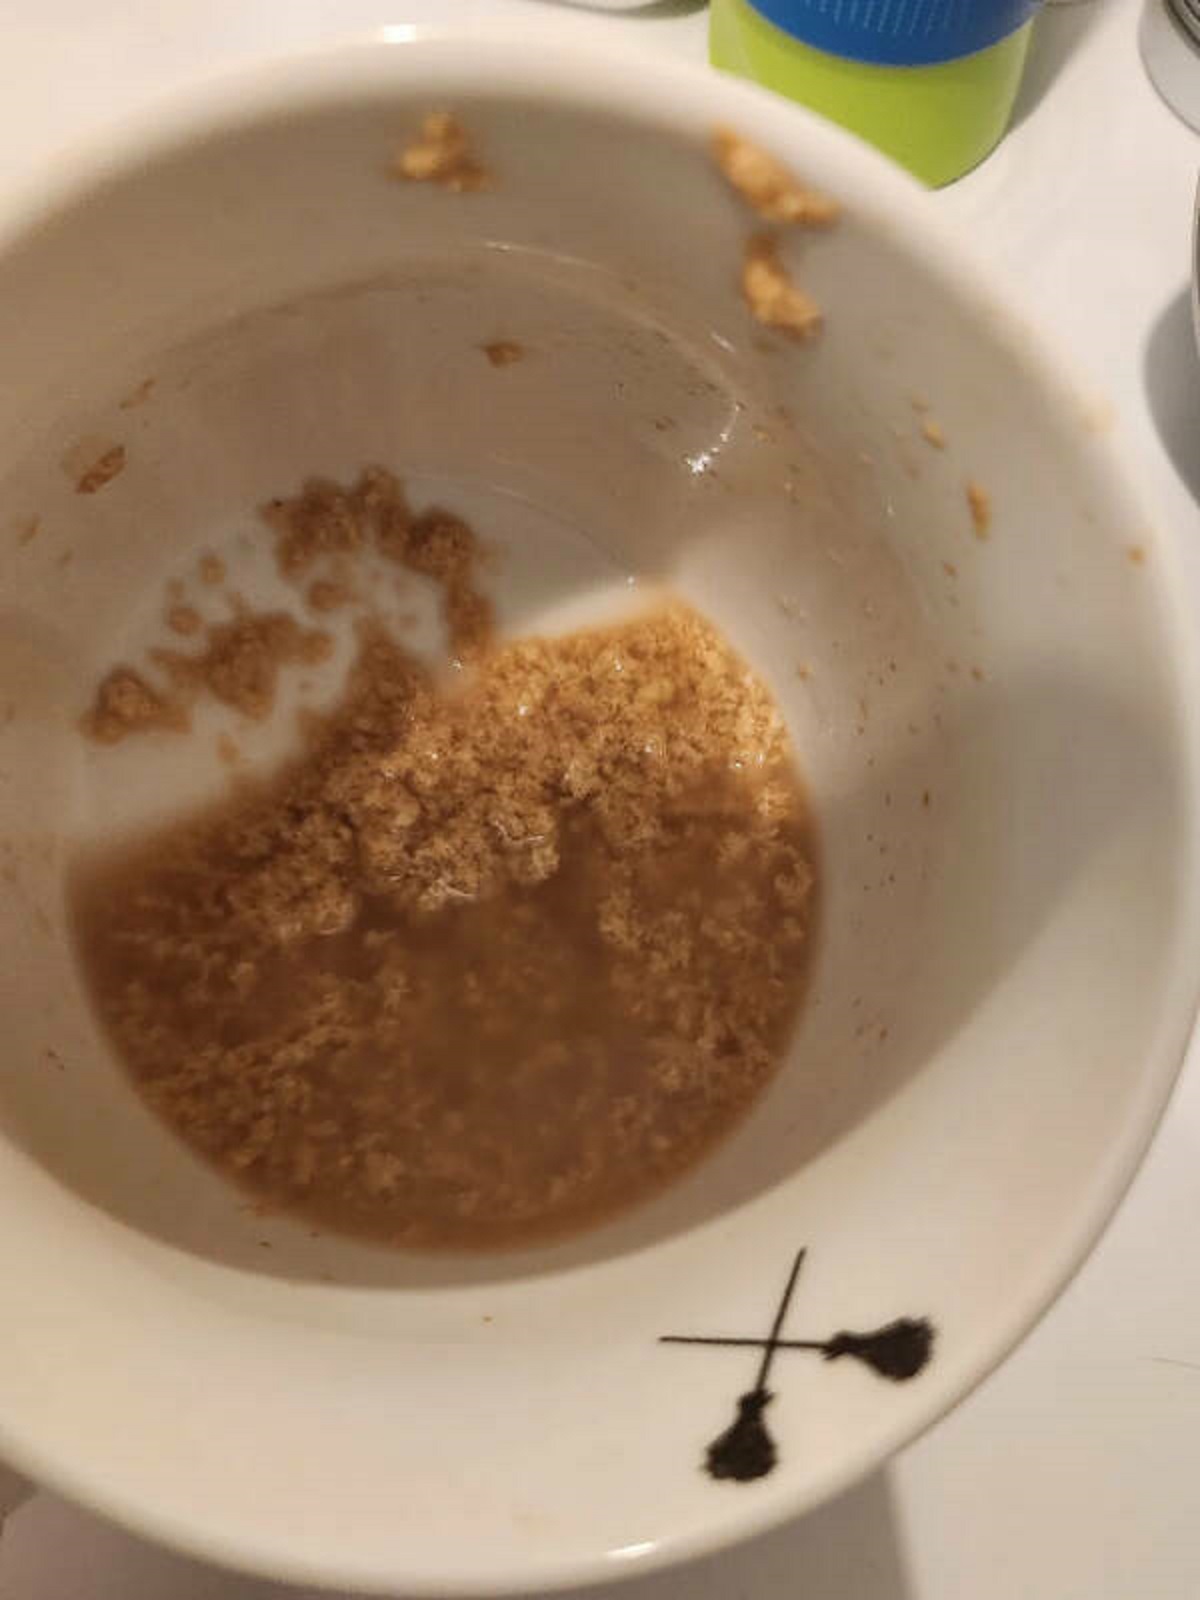 “Husband used expired milk to make my tea. Didn’t notice until the end.”